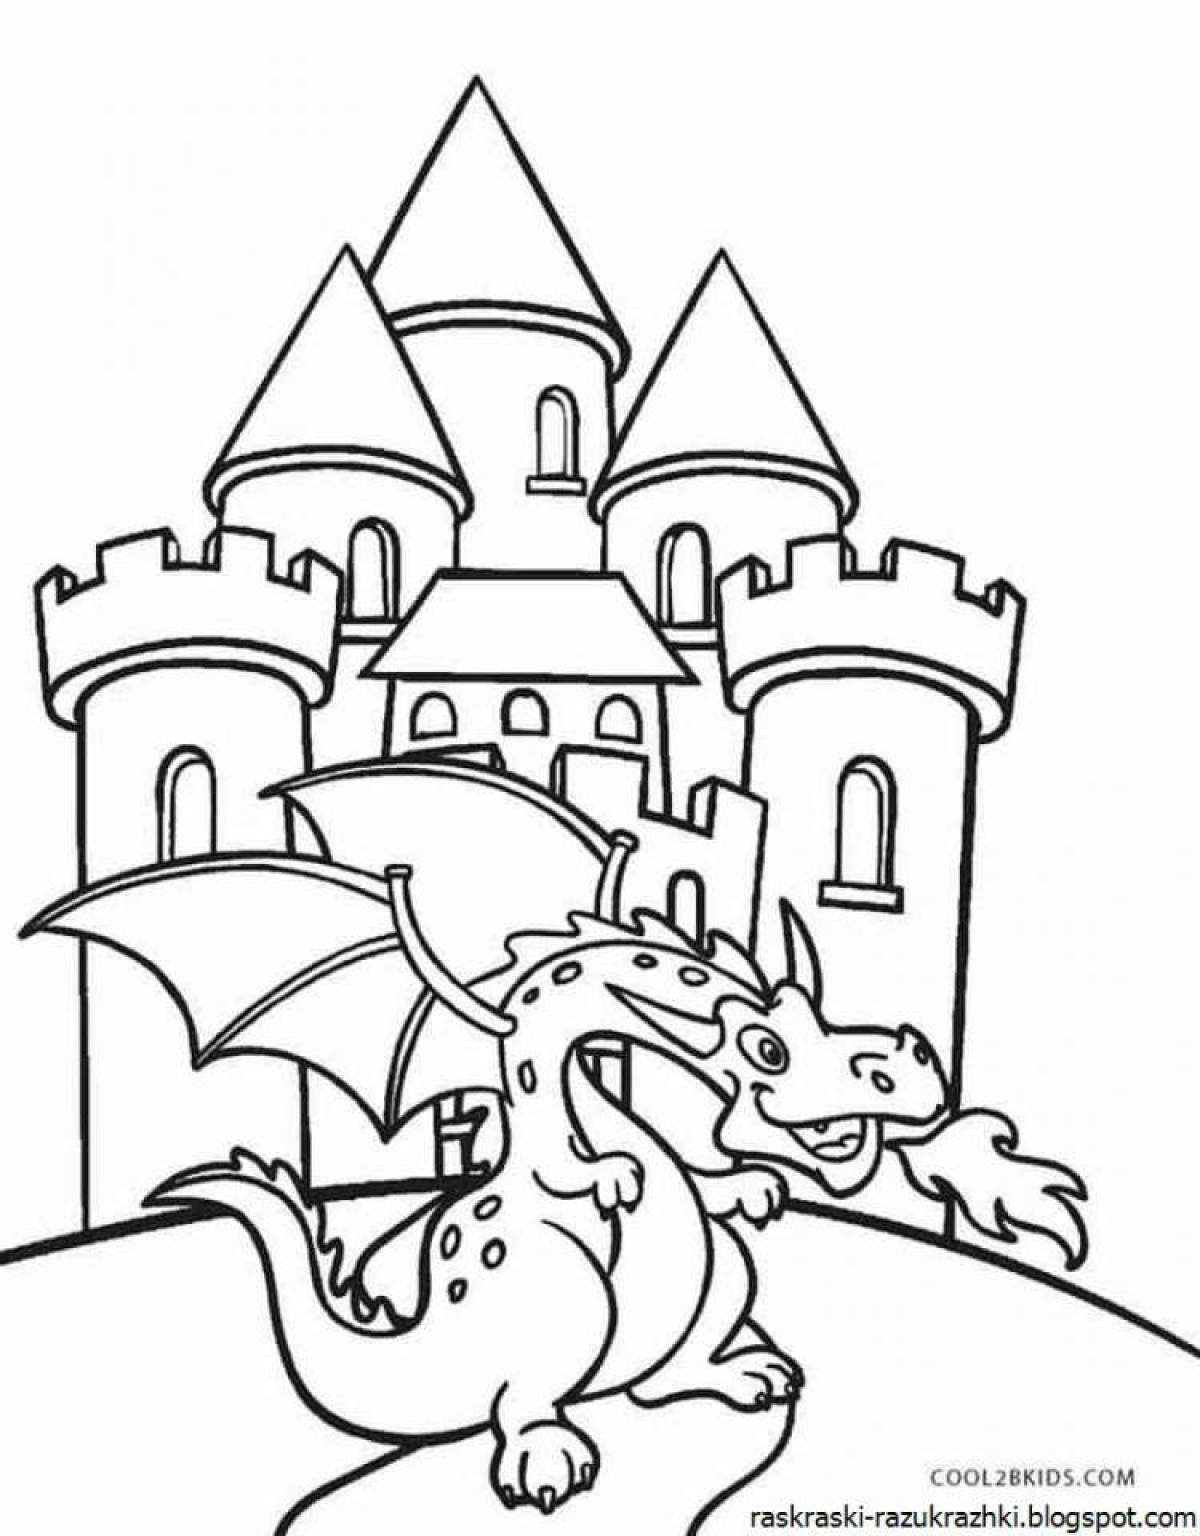 Charming castle coloring book for kids